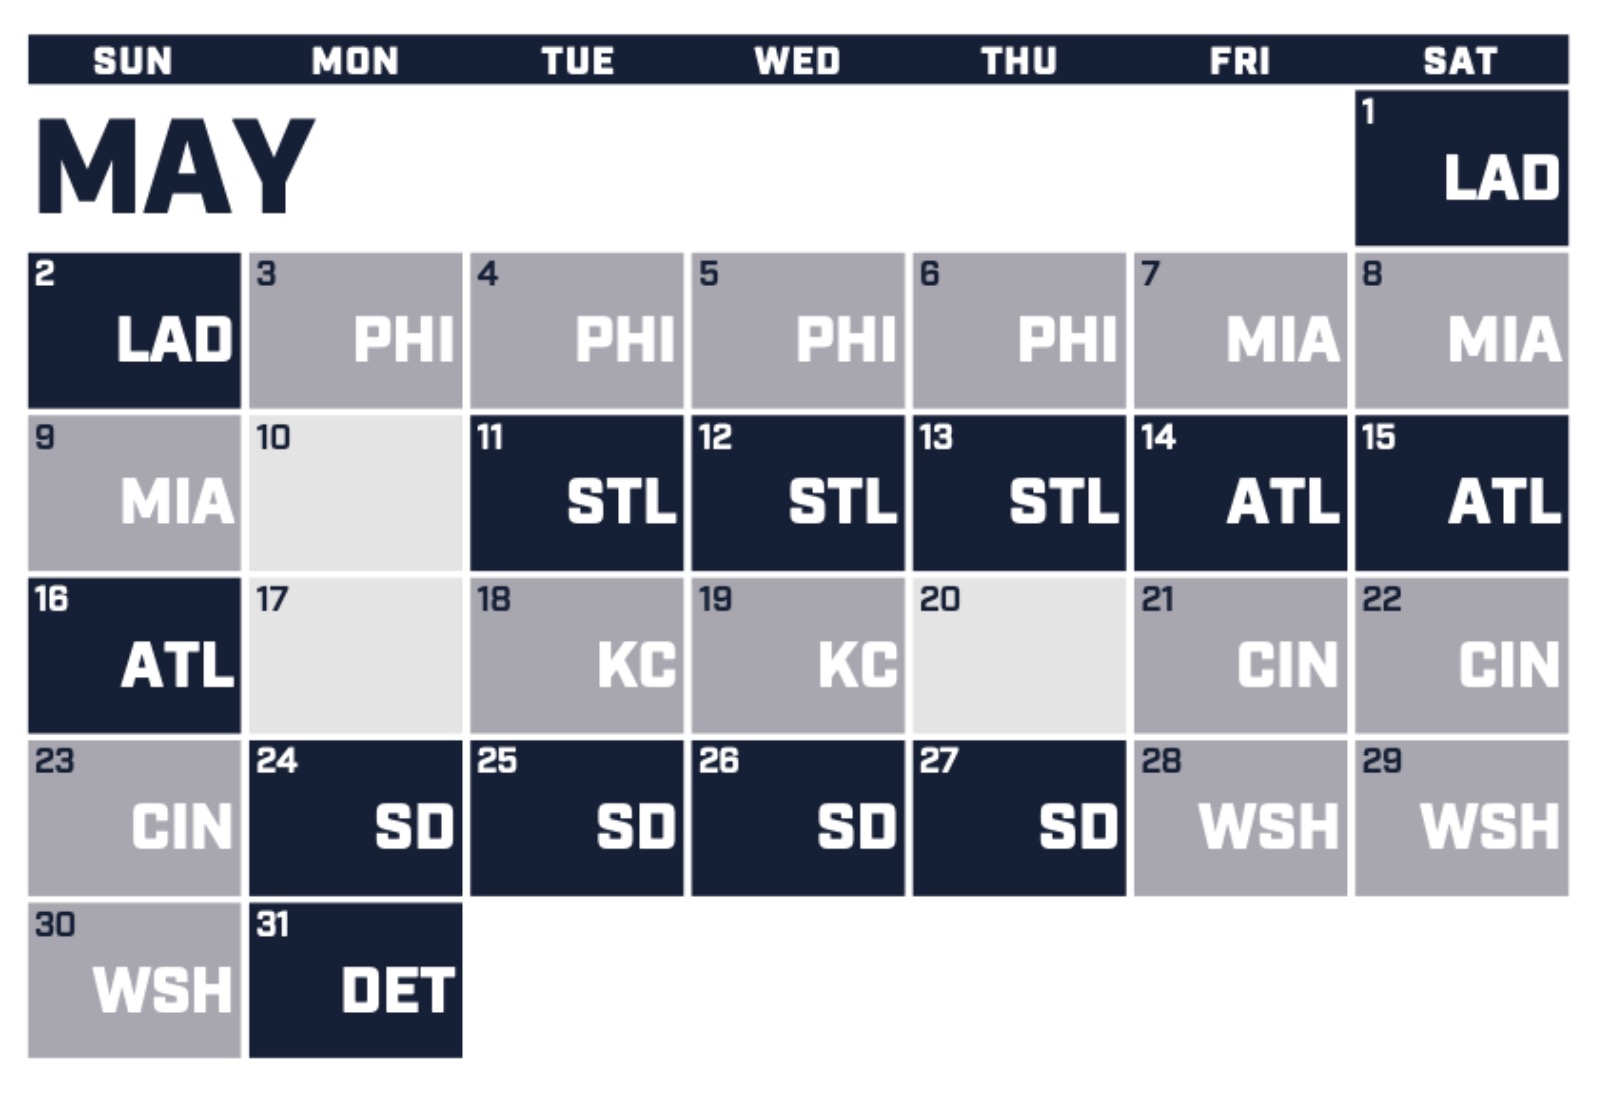 brewers-release-schedule-for-2021-season